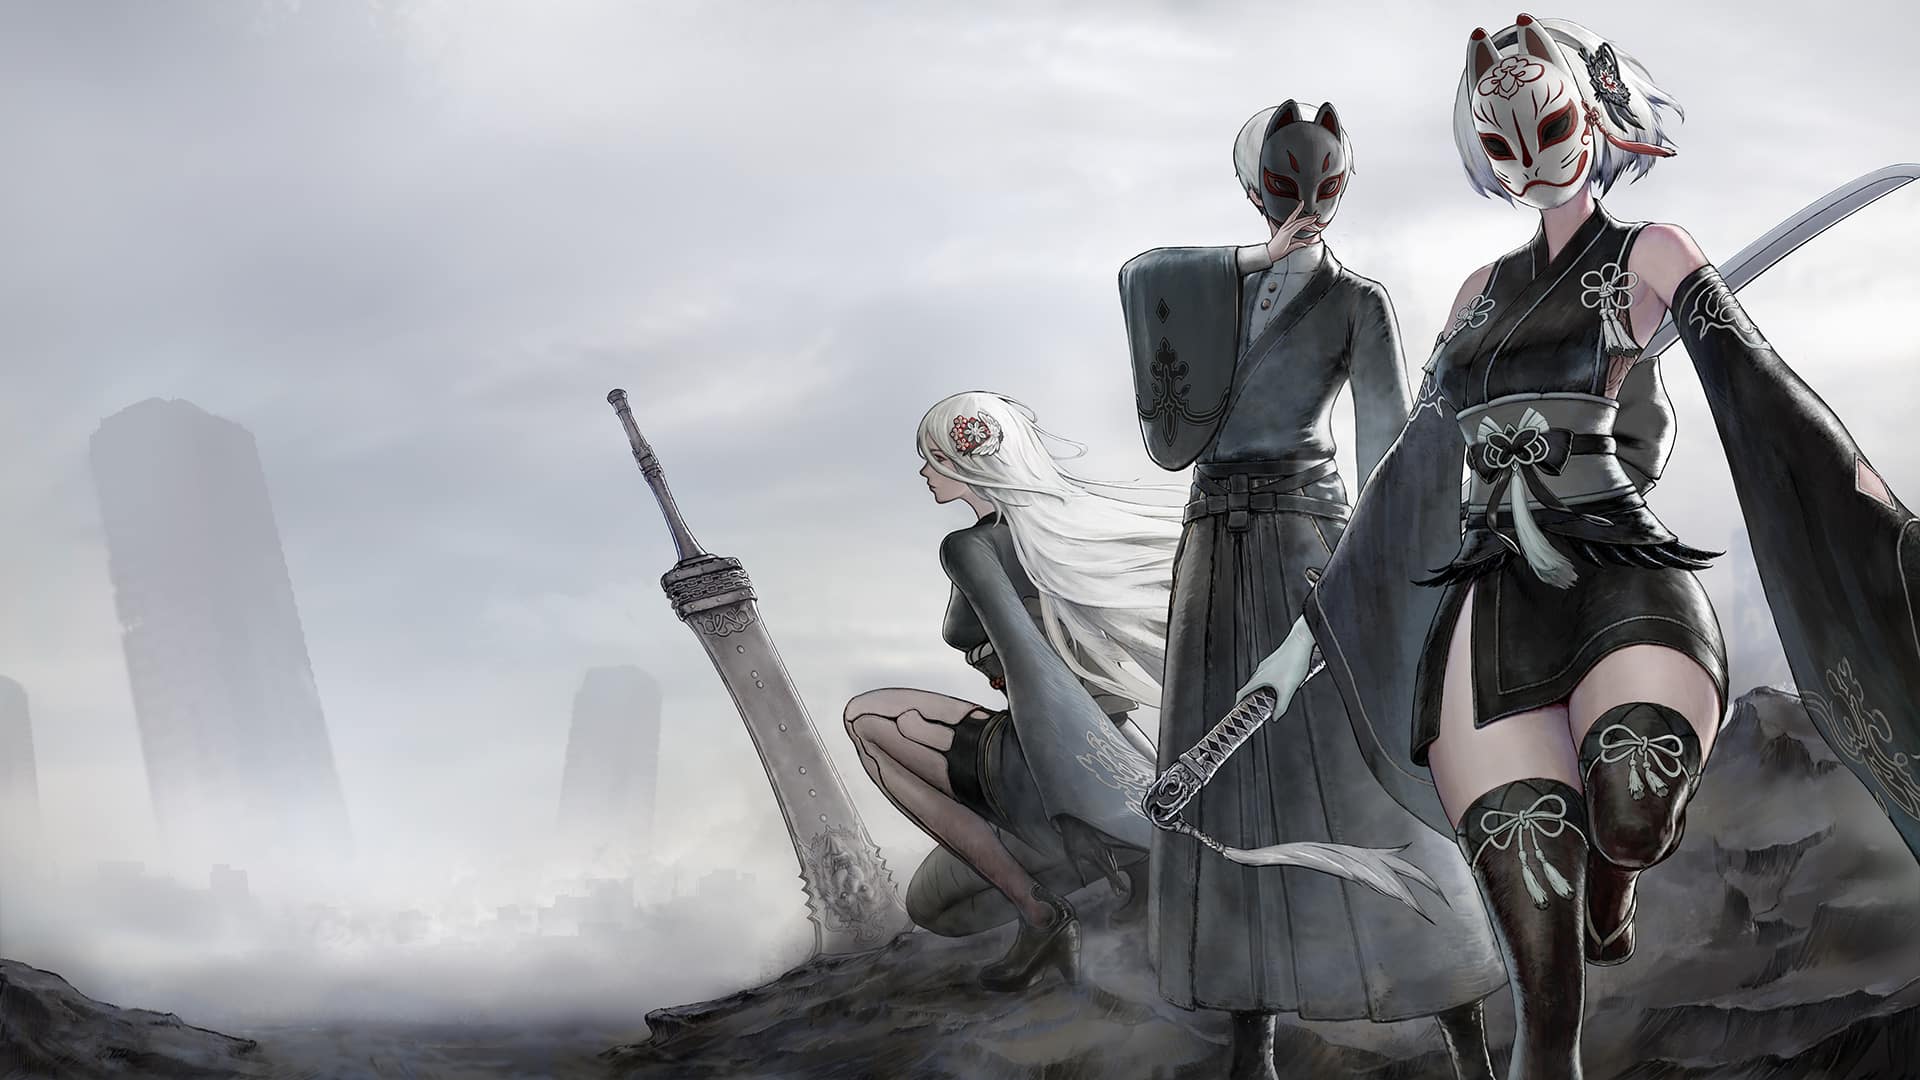 NieR:Automata The End of YoRHa Edition Shares 4 New Commemorative Launch Illustrations